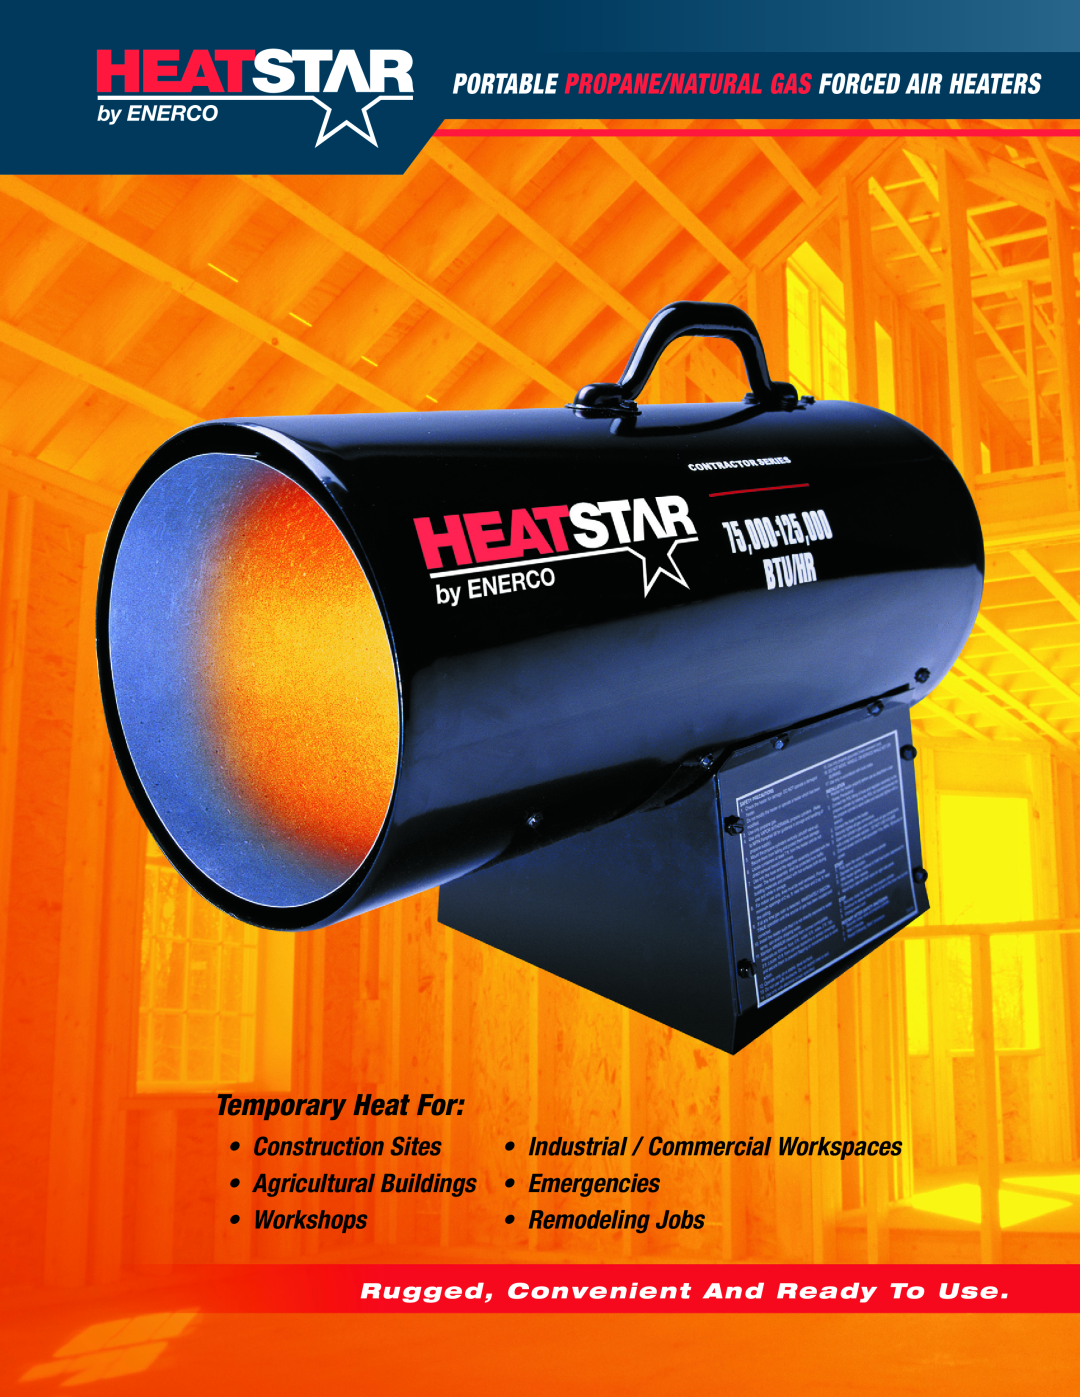 Enerco HS170FAVT manual Temporary Heat For, Construction Sites, Emergencies, Workshops, Remodeling Jobs 